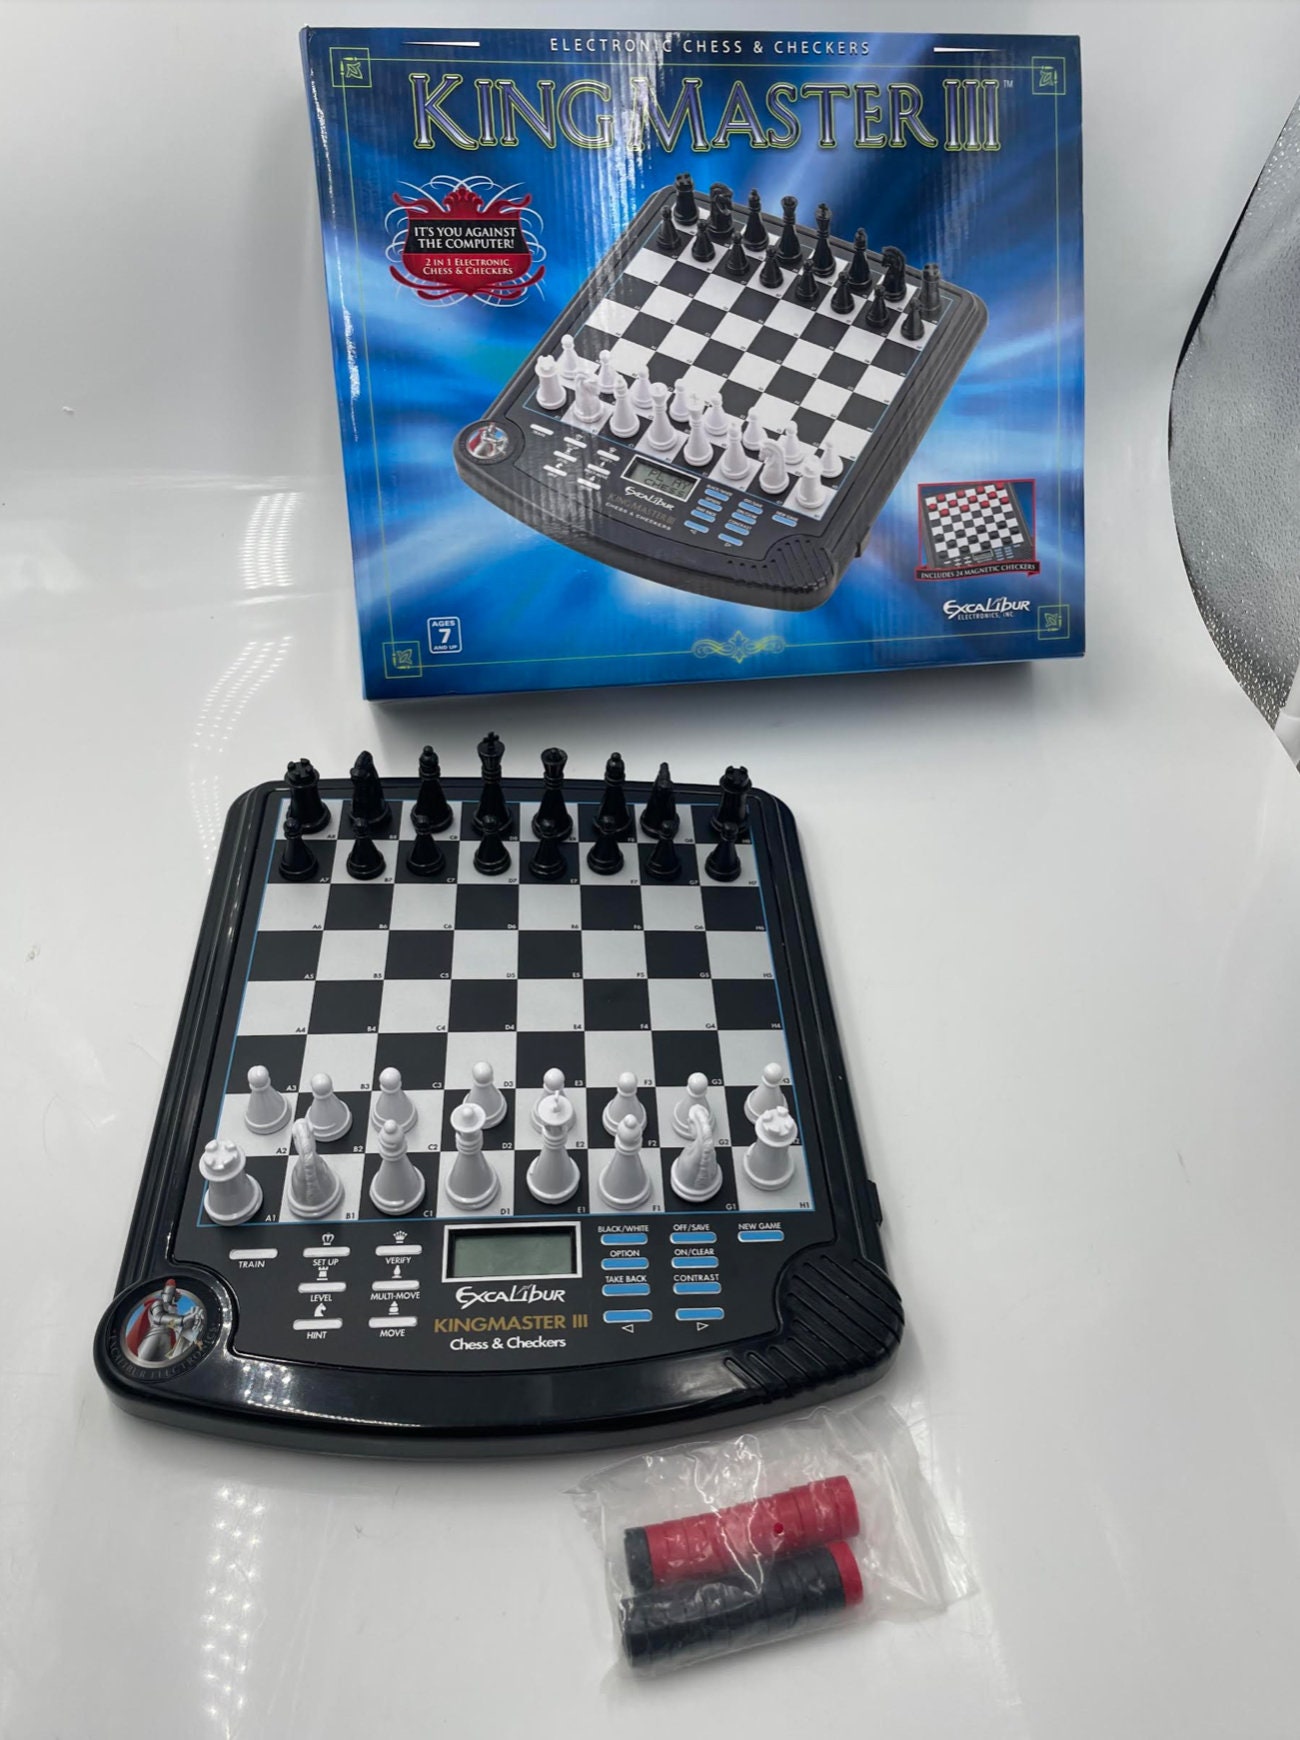 EXCALIBUR King Master III Electronic Chess Game 2 in 1 Chess Checkers Board Only 